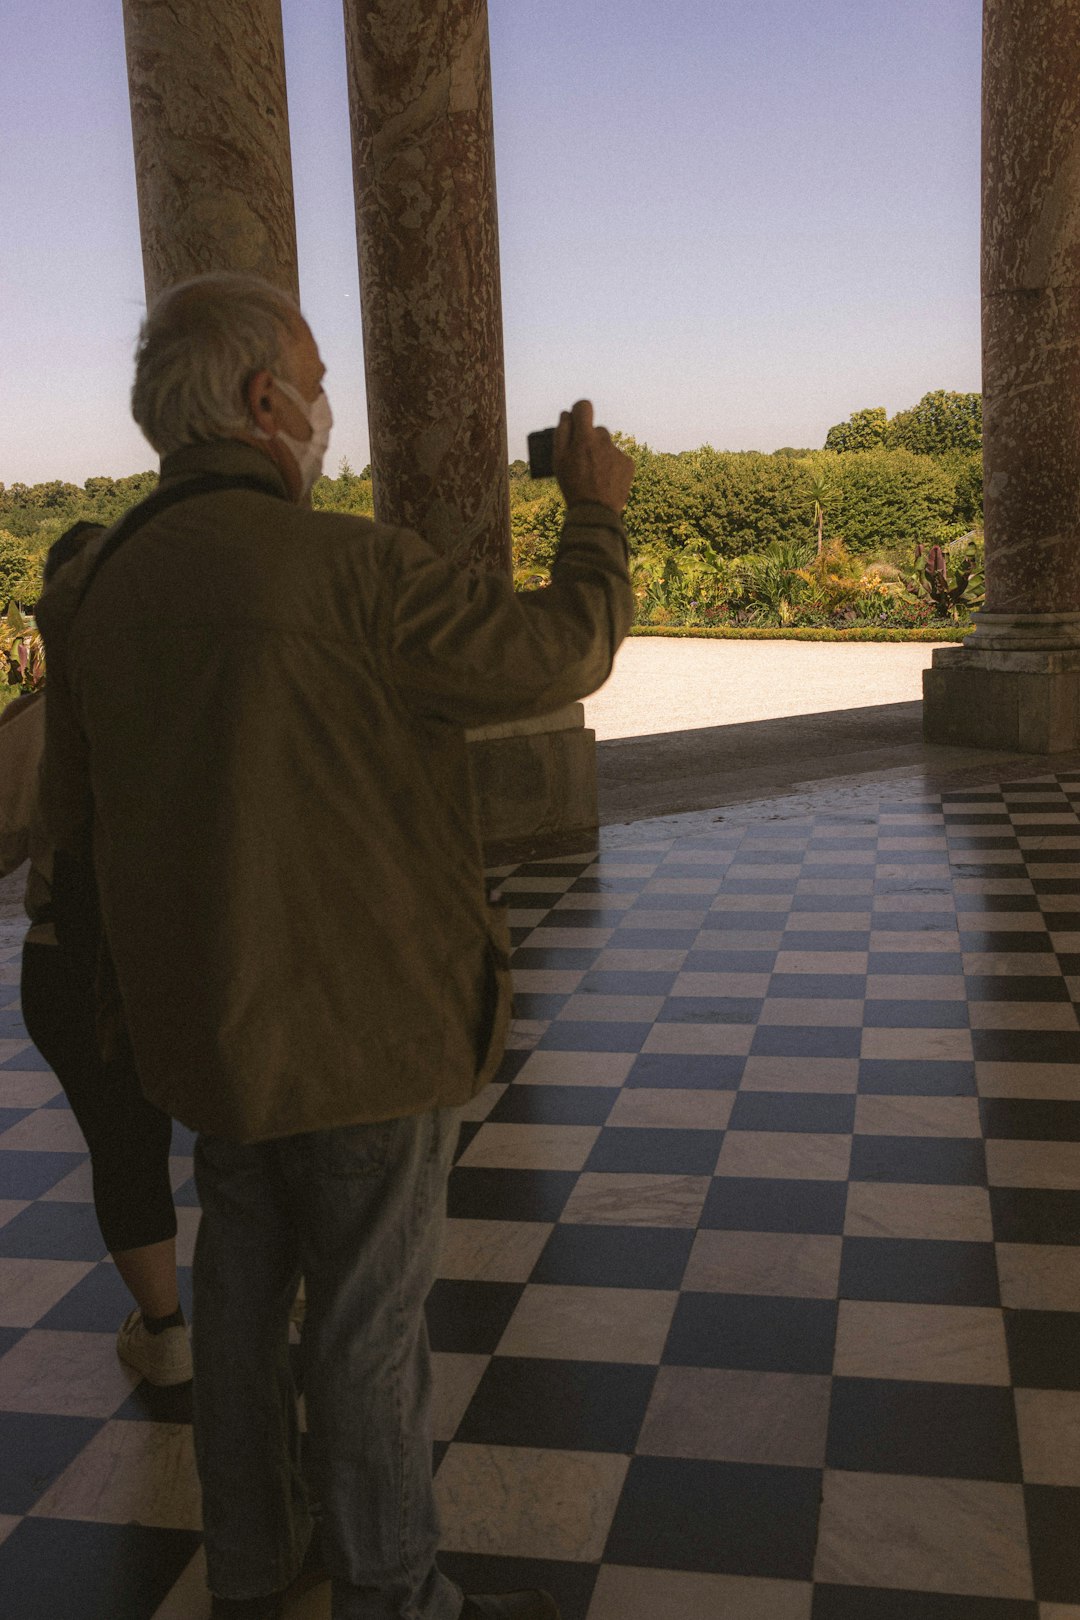 man in green jacket standing on gray and white floor tiles during daytime